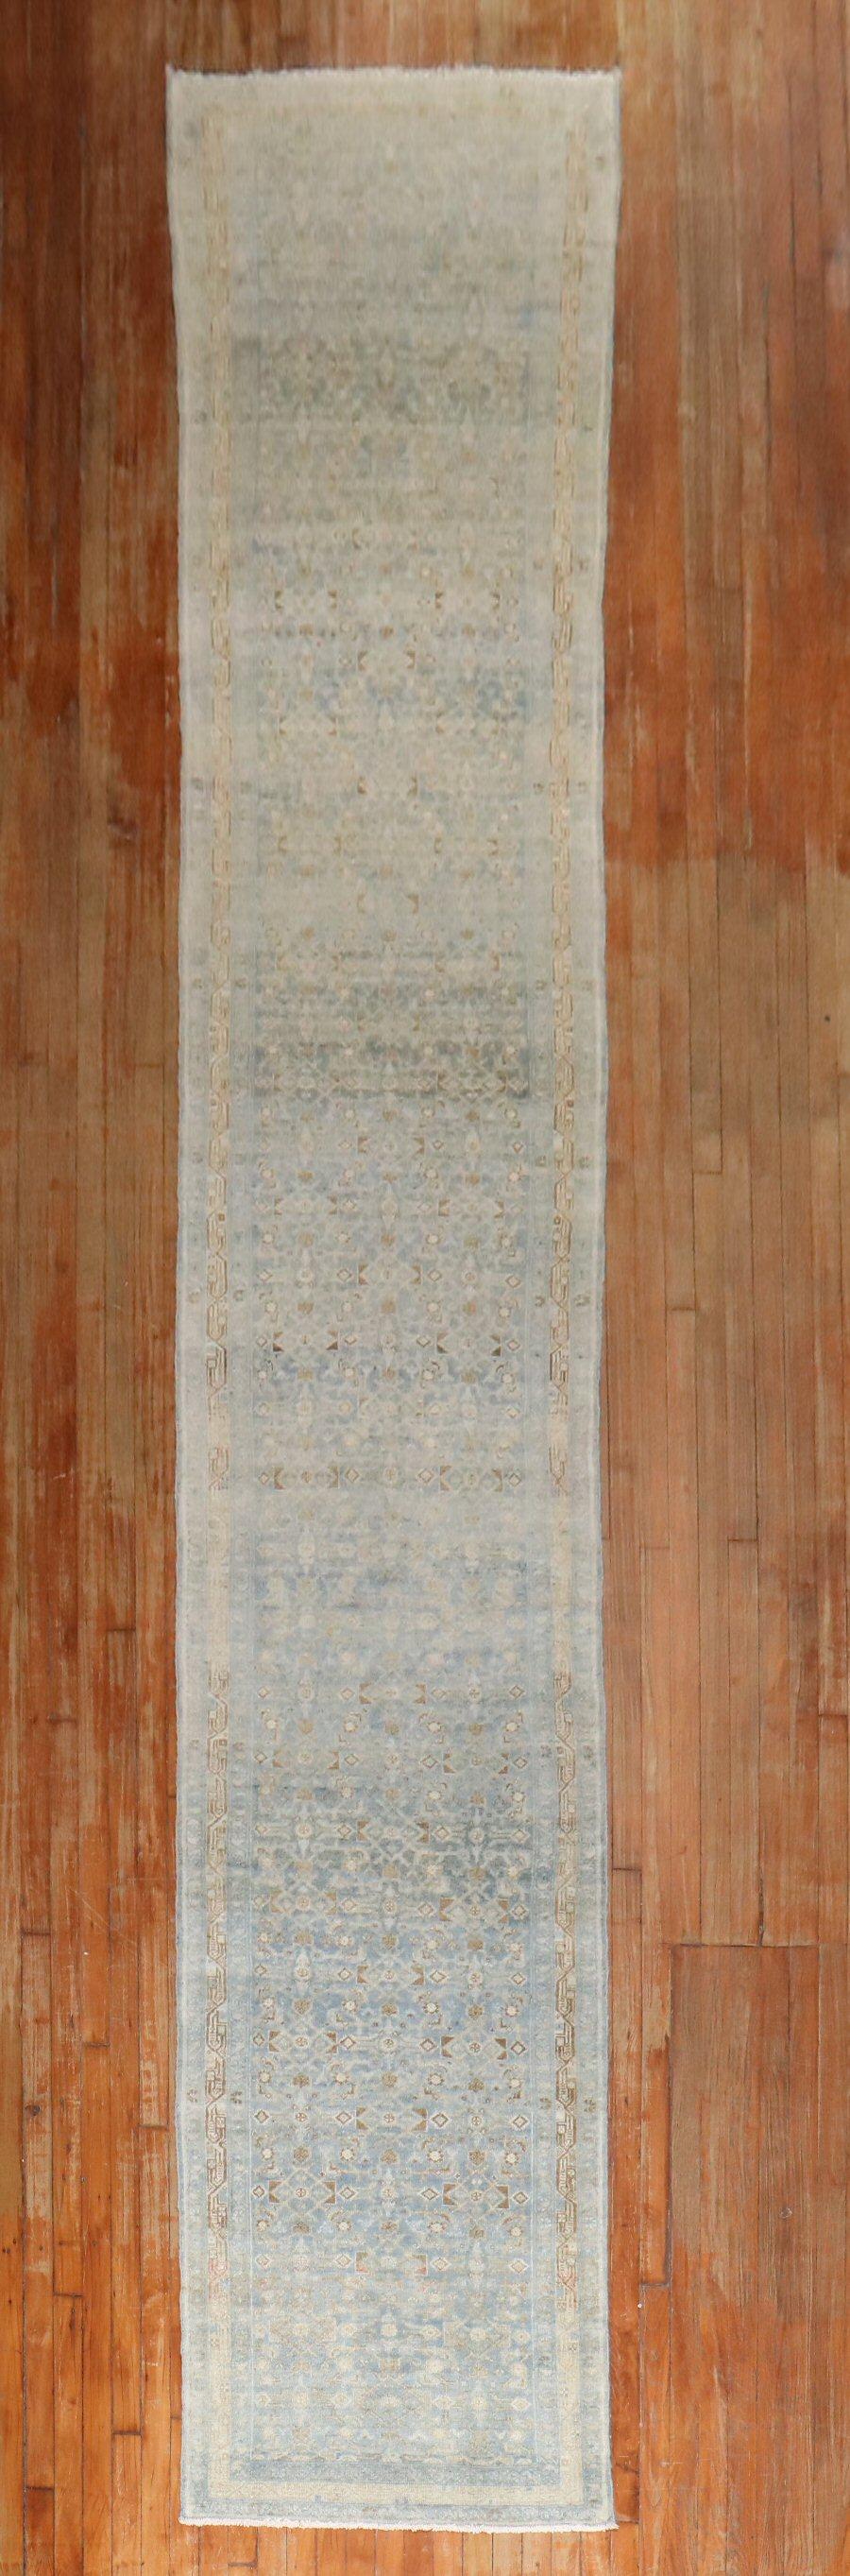 An early 20th century long and narrow powder blue color Persian Bibikabad Runner

2'9'' x 18'10''

